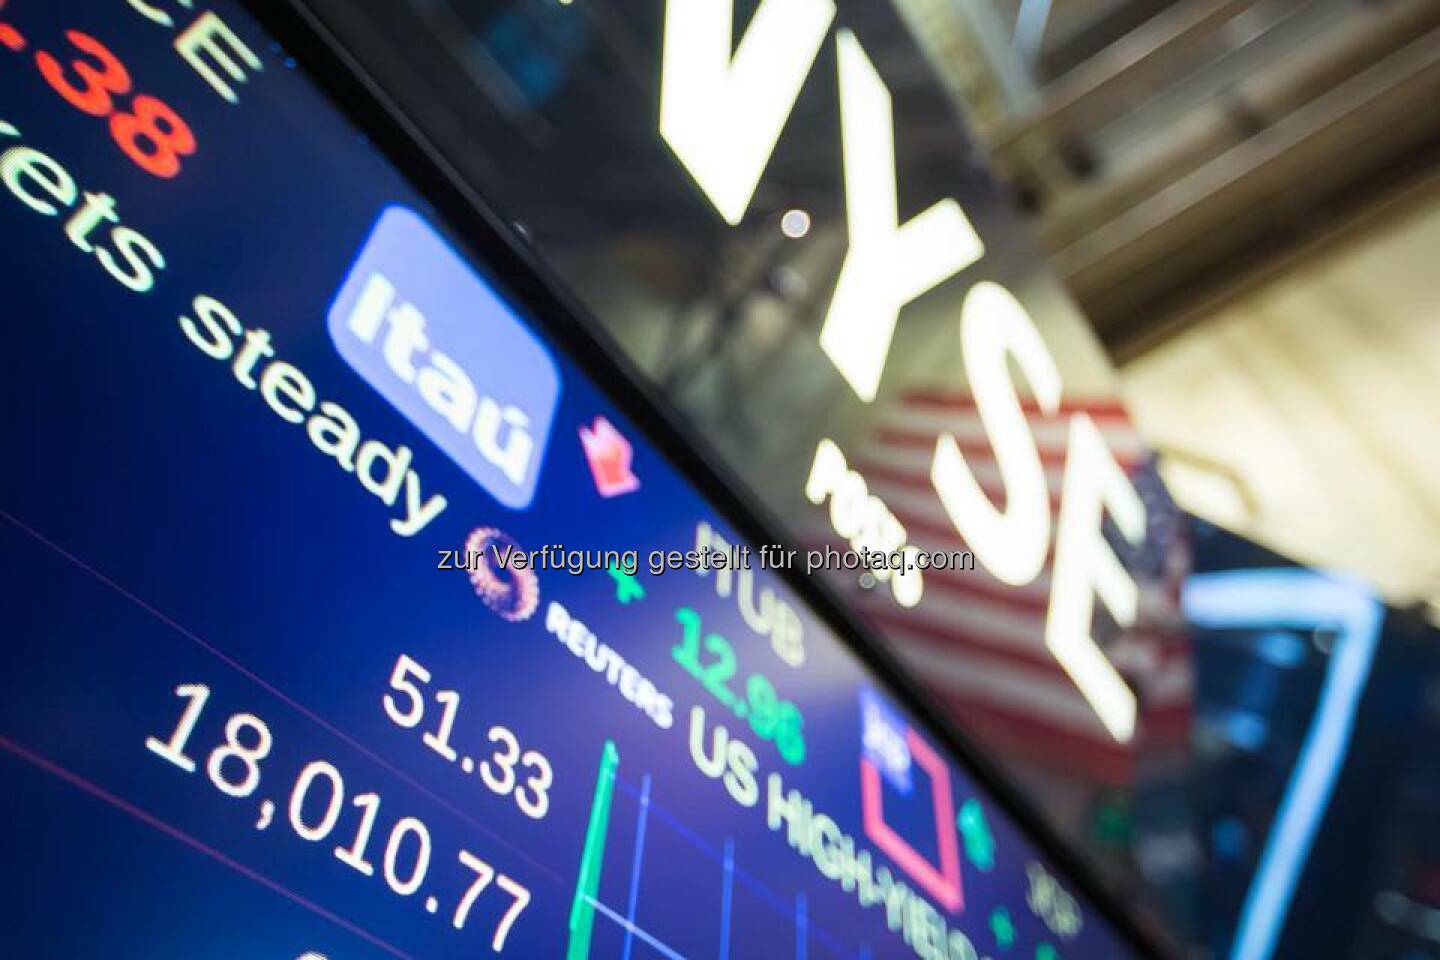 Dow topped 18,000 for first time ever  Source: http://facebook.com/NYSE